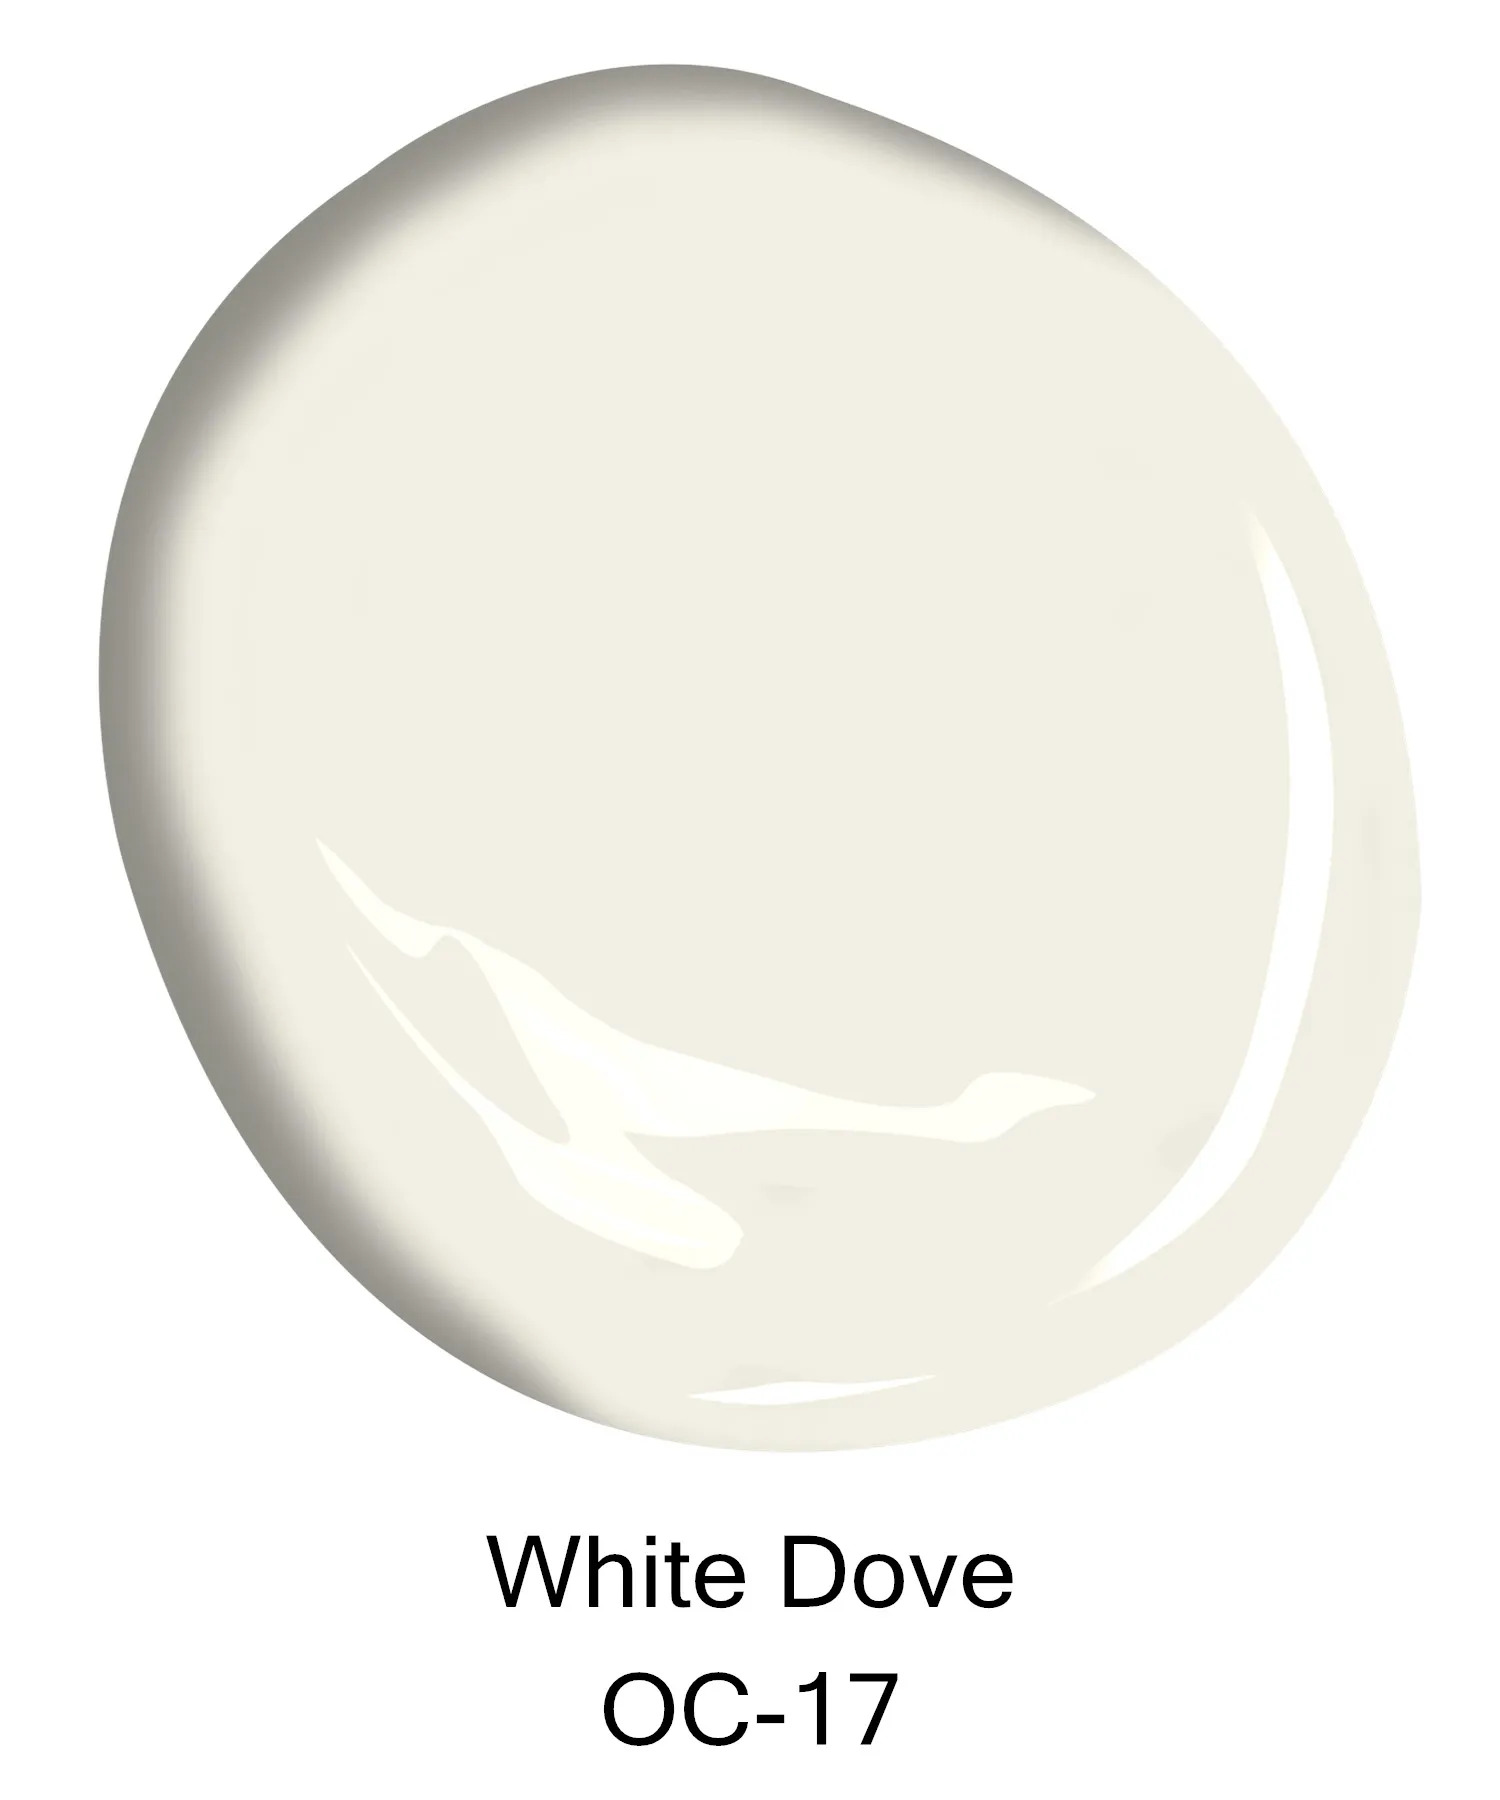 Is Dove White Look Like Gray?